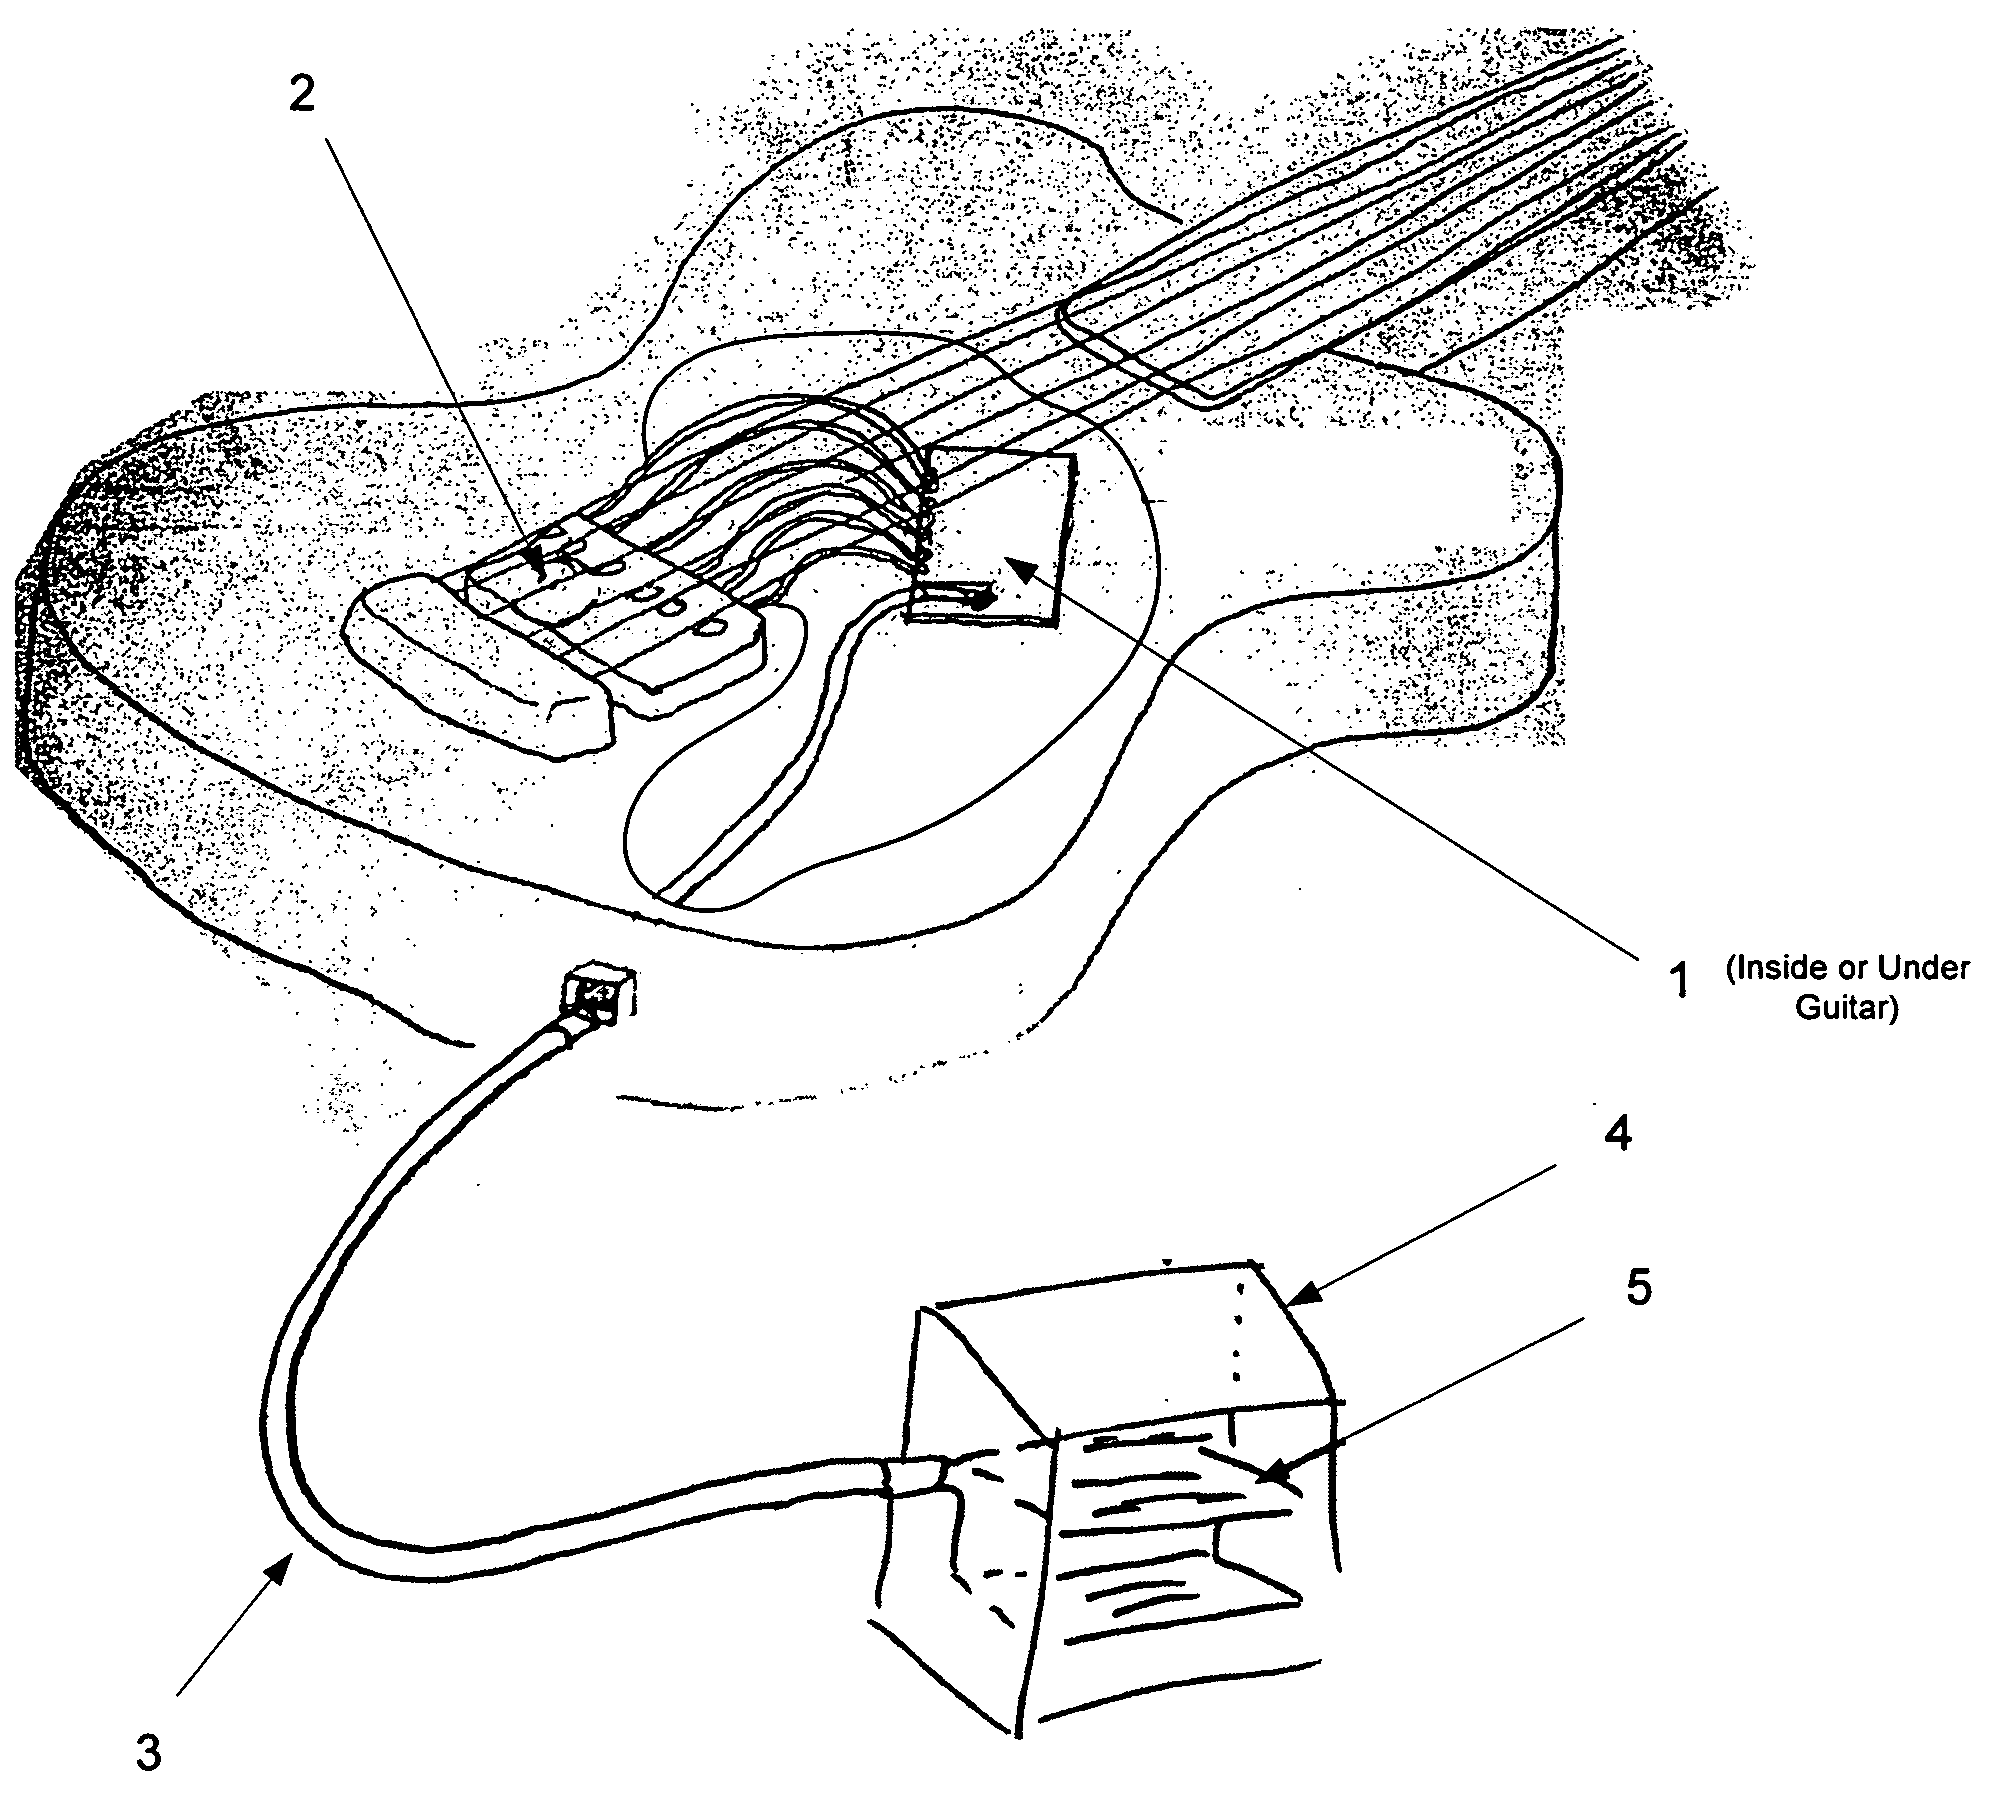 System for digitally transmitting audio data from individual electric guitar strings